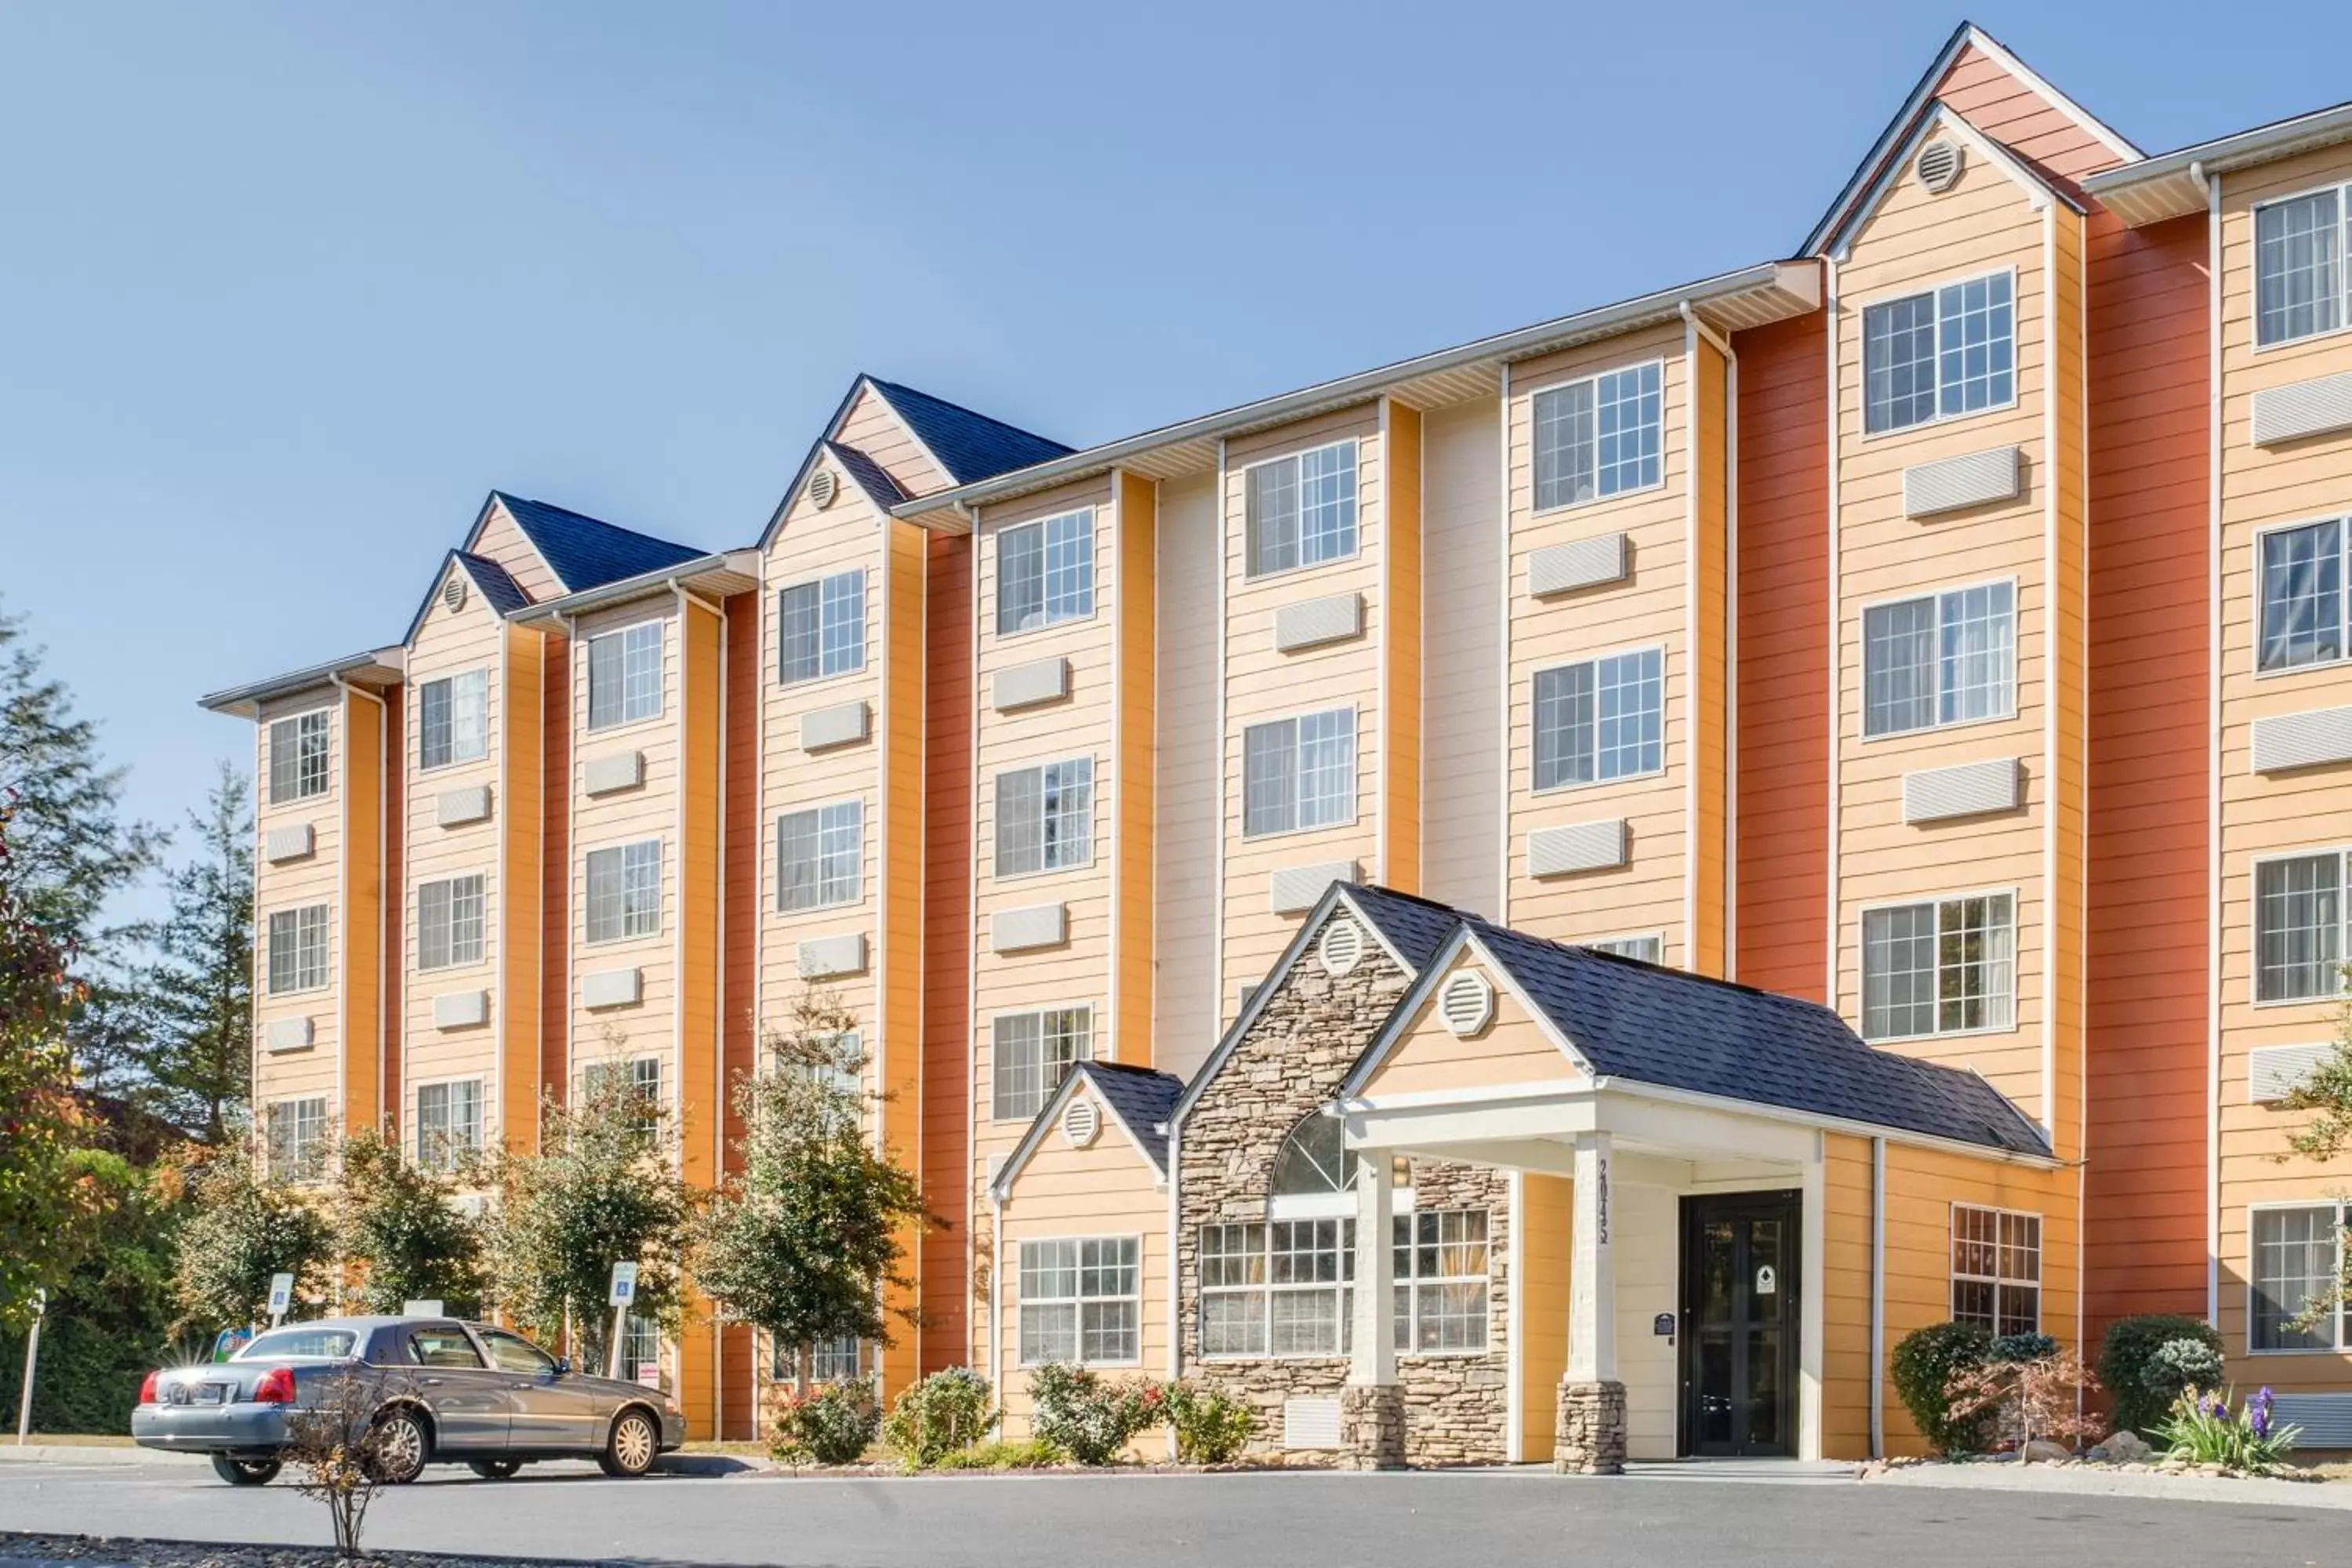 Facade/entrance, Property Building in Microtel Inn & Suites by Wyndham Pigeon Forge